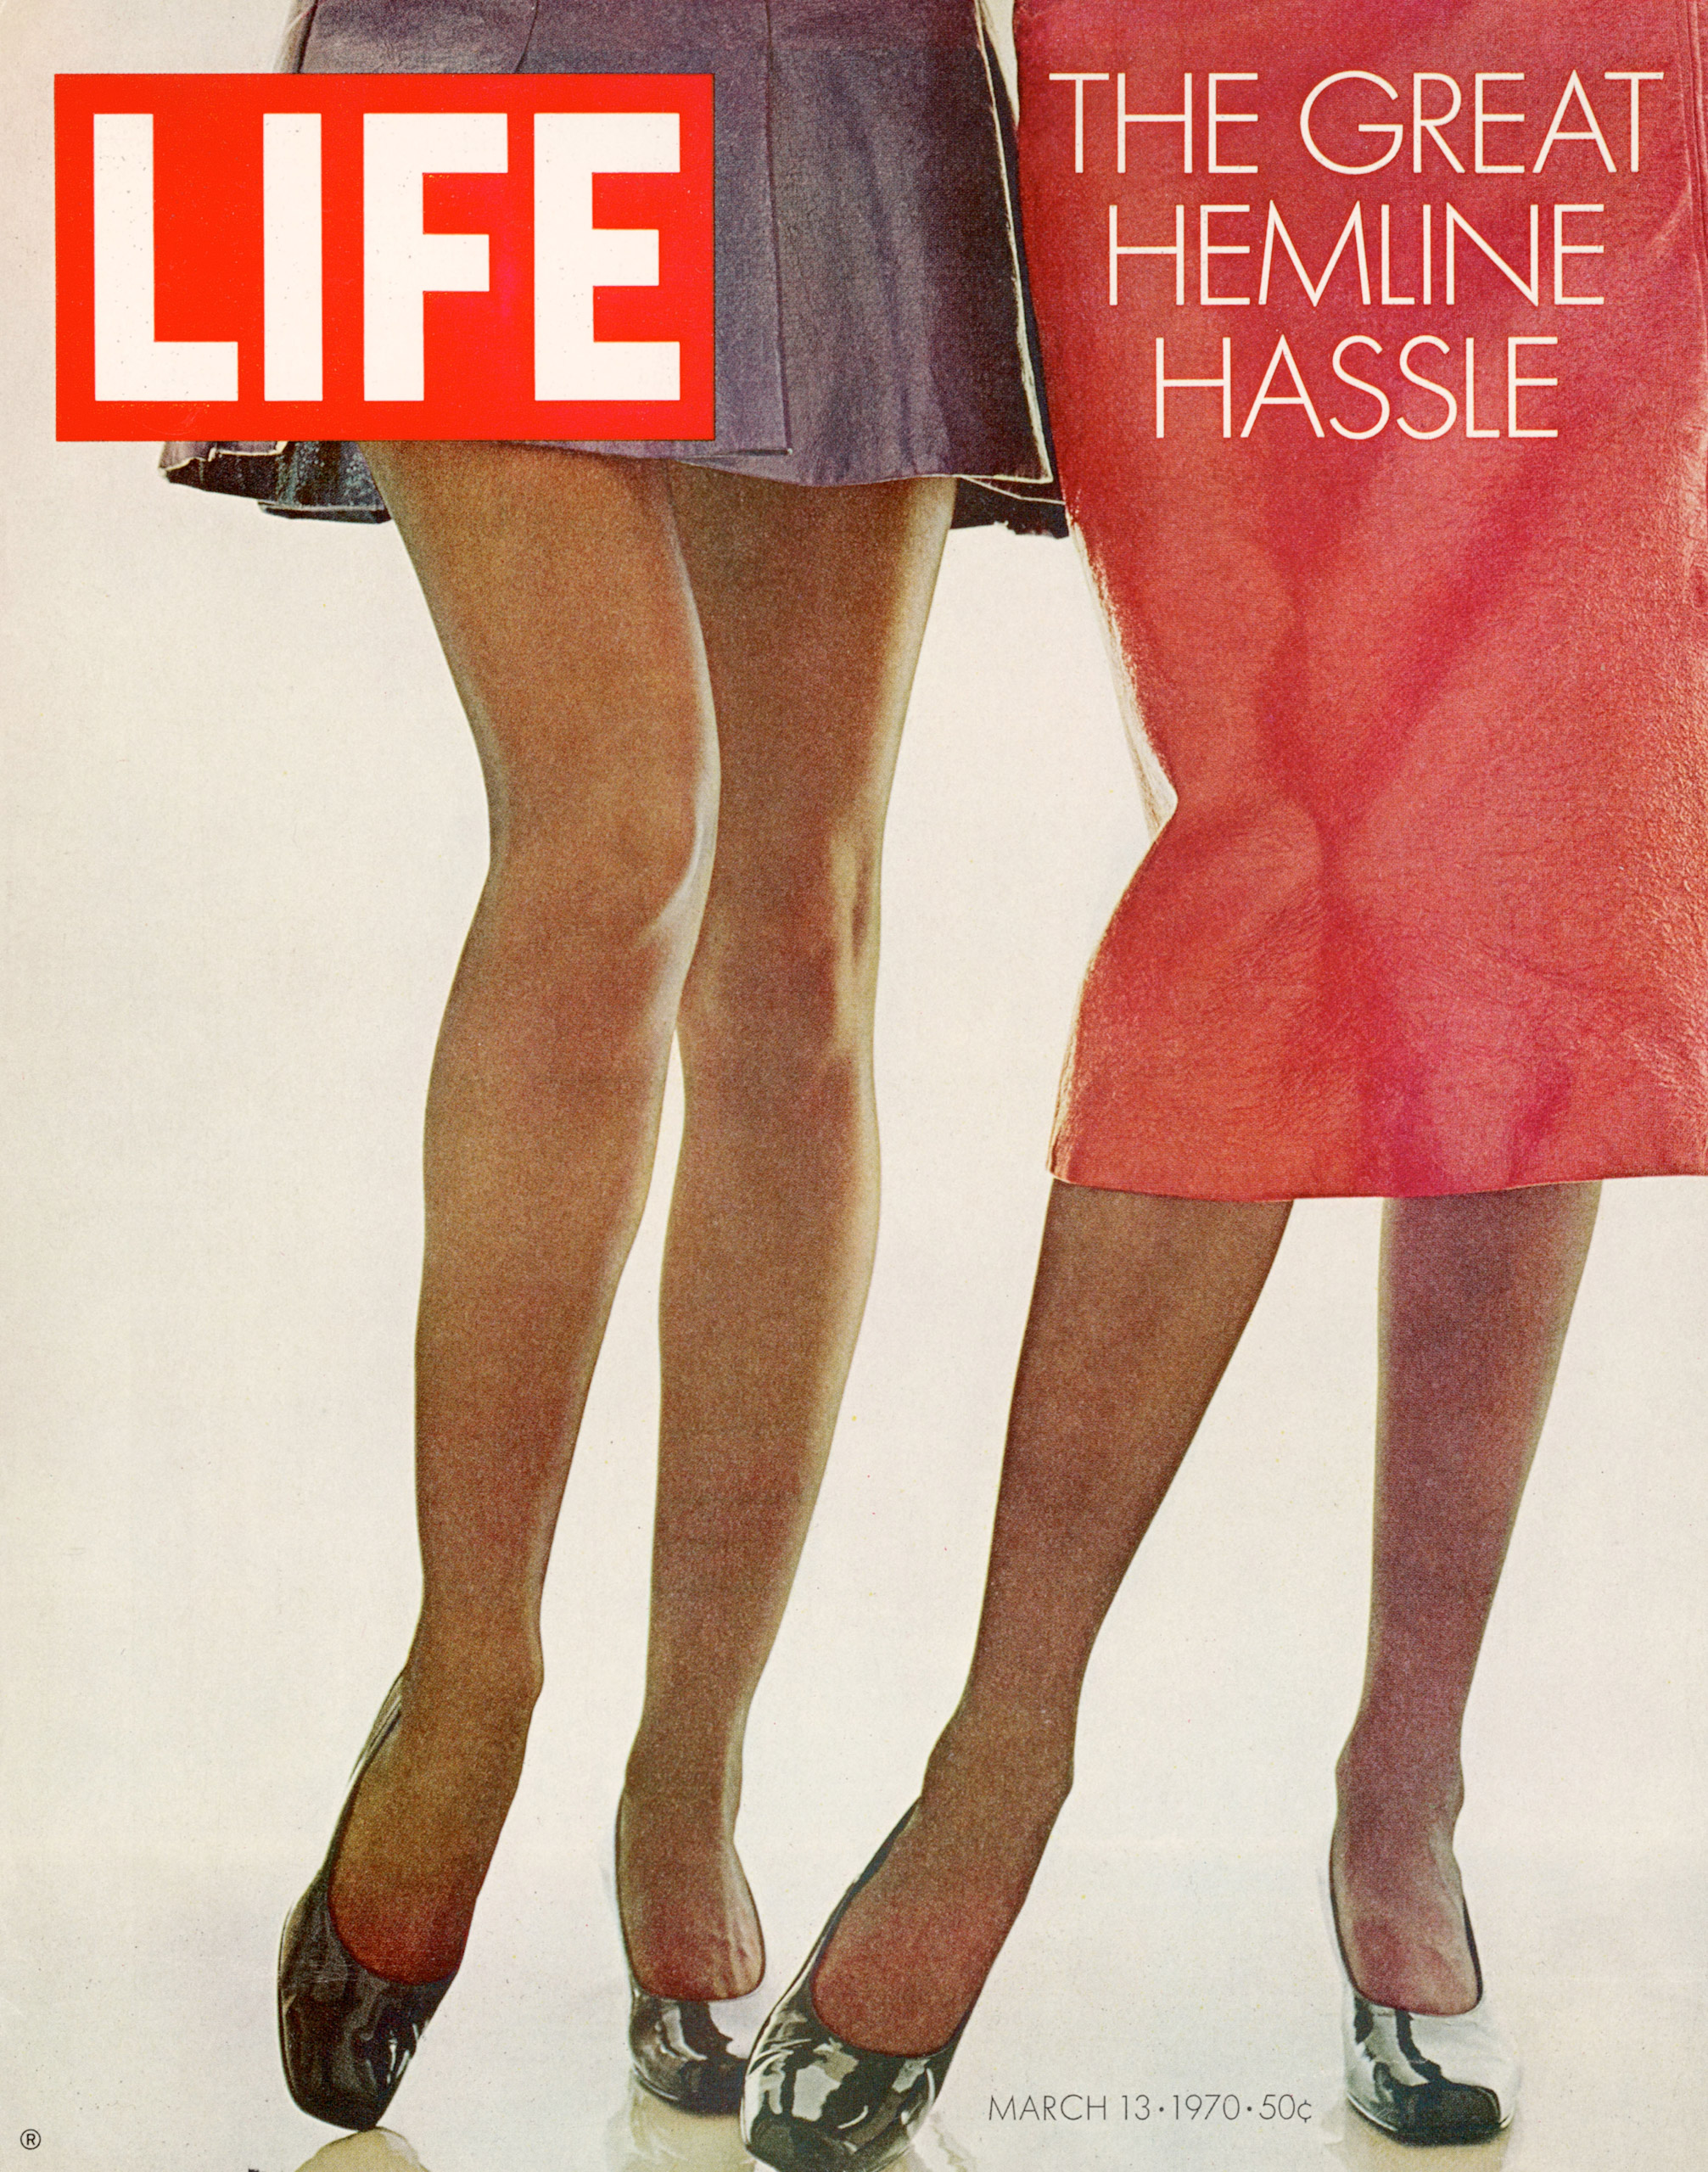 March 13, 1970 cover of LIFE magazine.